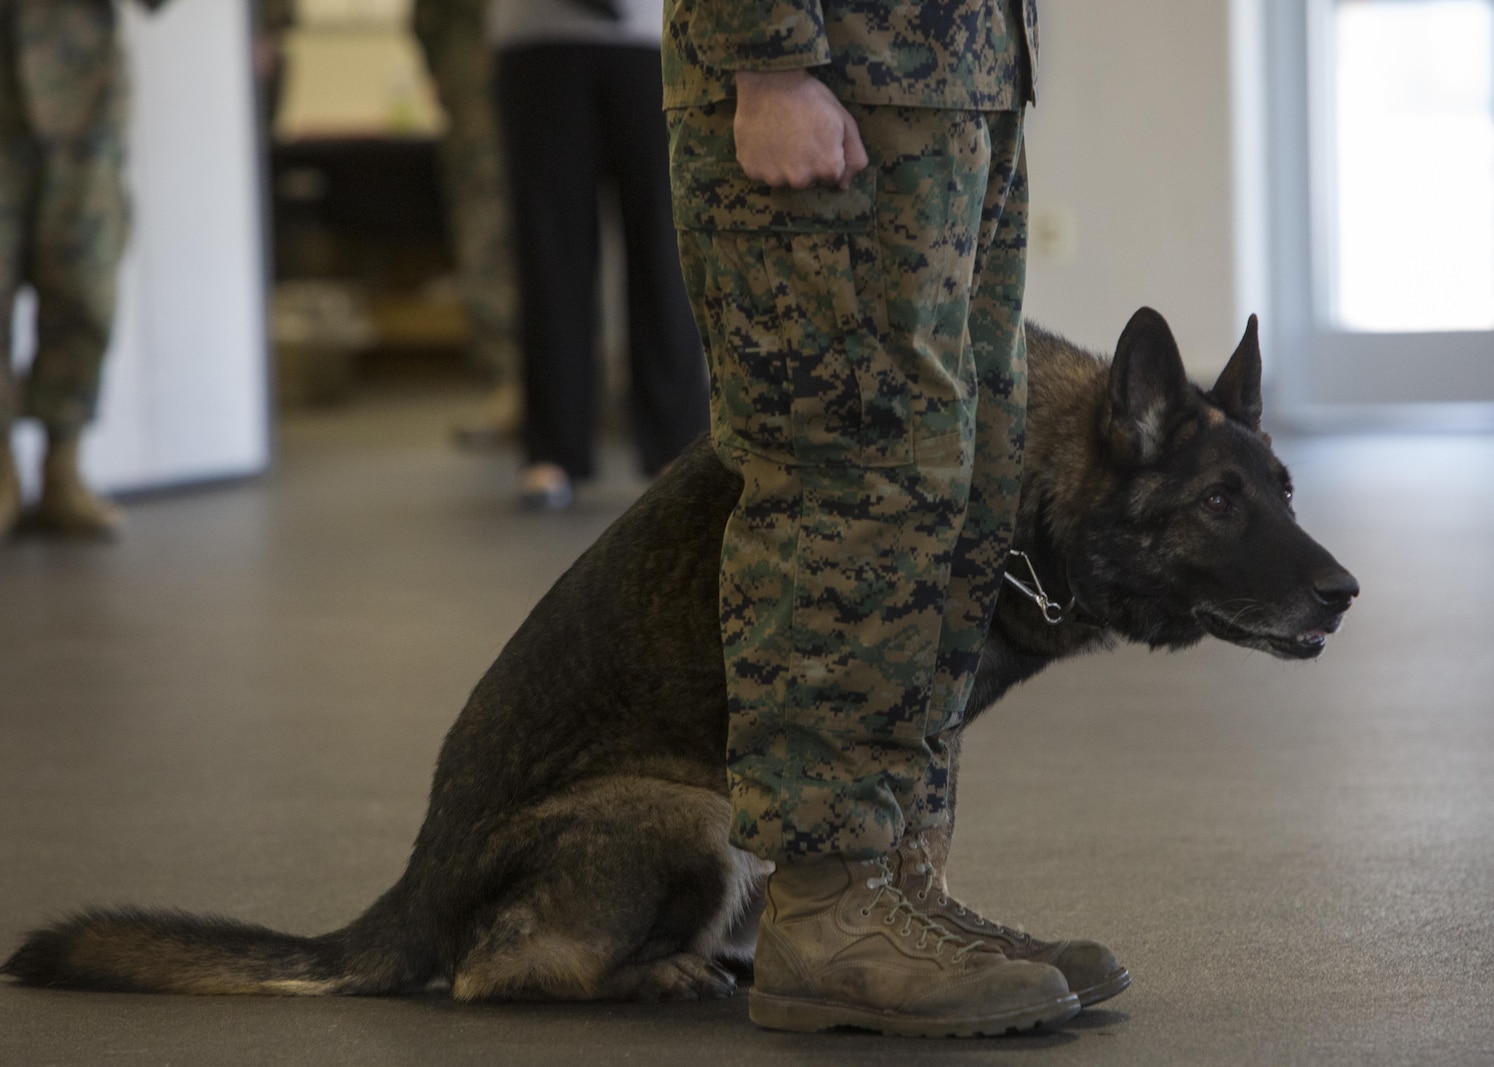 Military Working Dog Sirius, who served with 2nd Law Enforcement Battalion, anxiously observes his retirement ceremony at the Ashley Kennels at Camp Lejeune, N.C., Feb. 26, 2016. Sirius was adopted by the family of his former handler, Sgt. Joshua Ashley, who was killed while they were on patrol together in support of Operation Enduring Freedom in 2012. (U.S. Marine Corps Photo by Cpl. Michelle Reif/Released.)